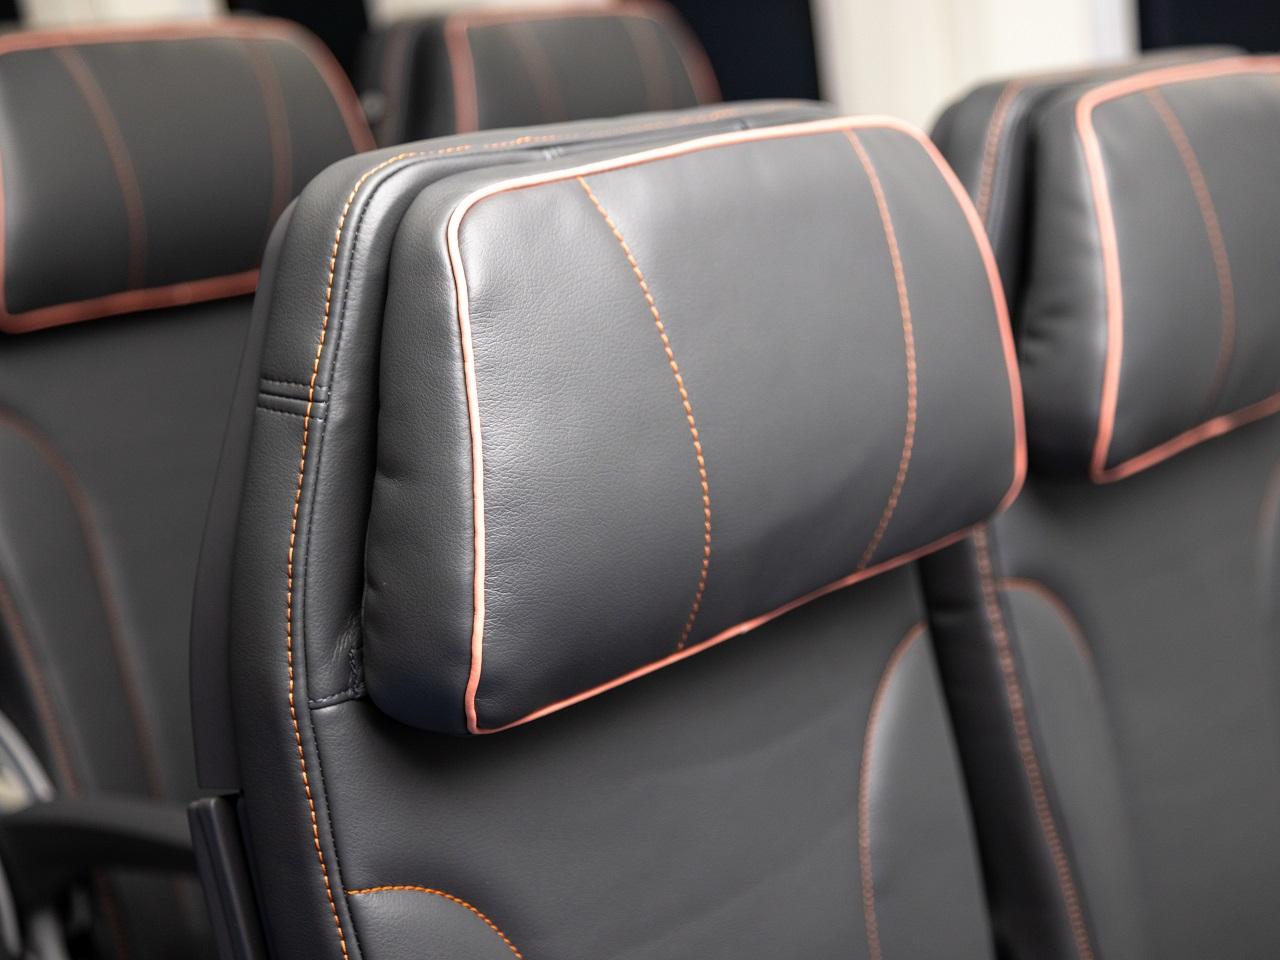 Photograph of seating provided by Air Japan.